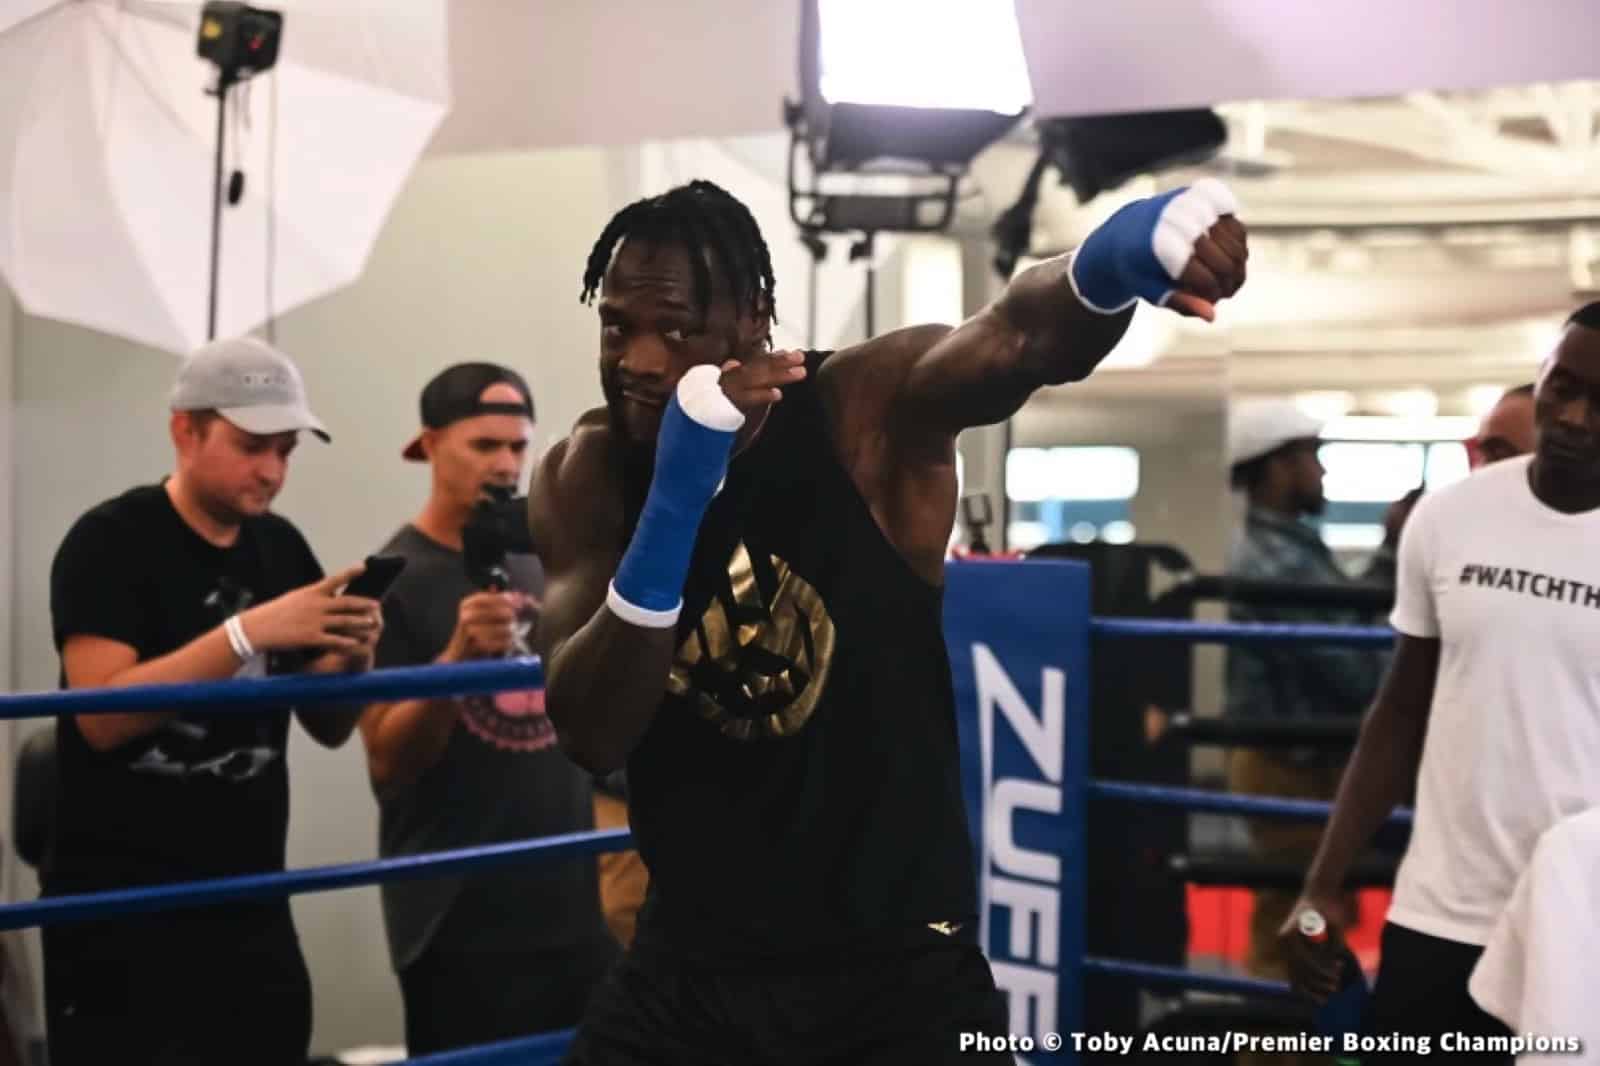 Deontay Wilder boxing image / photo